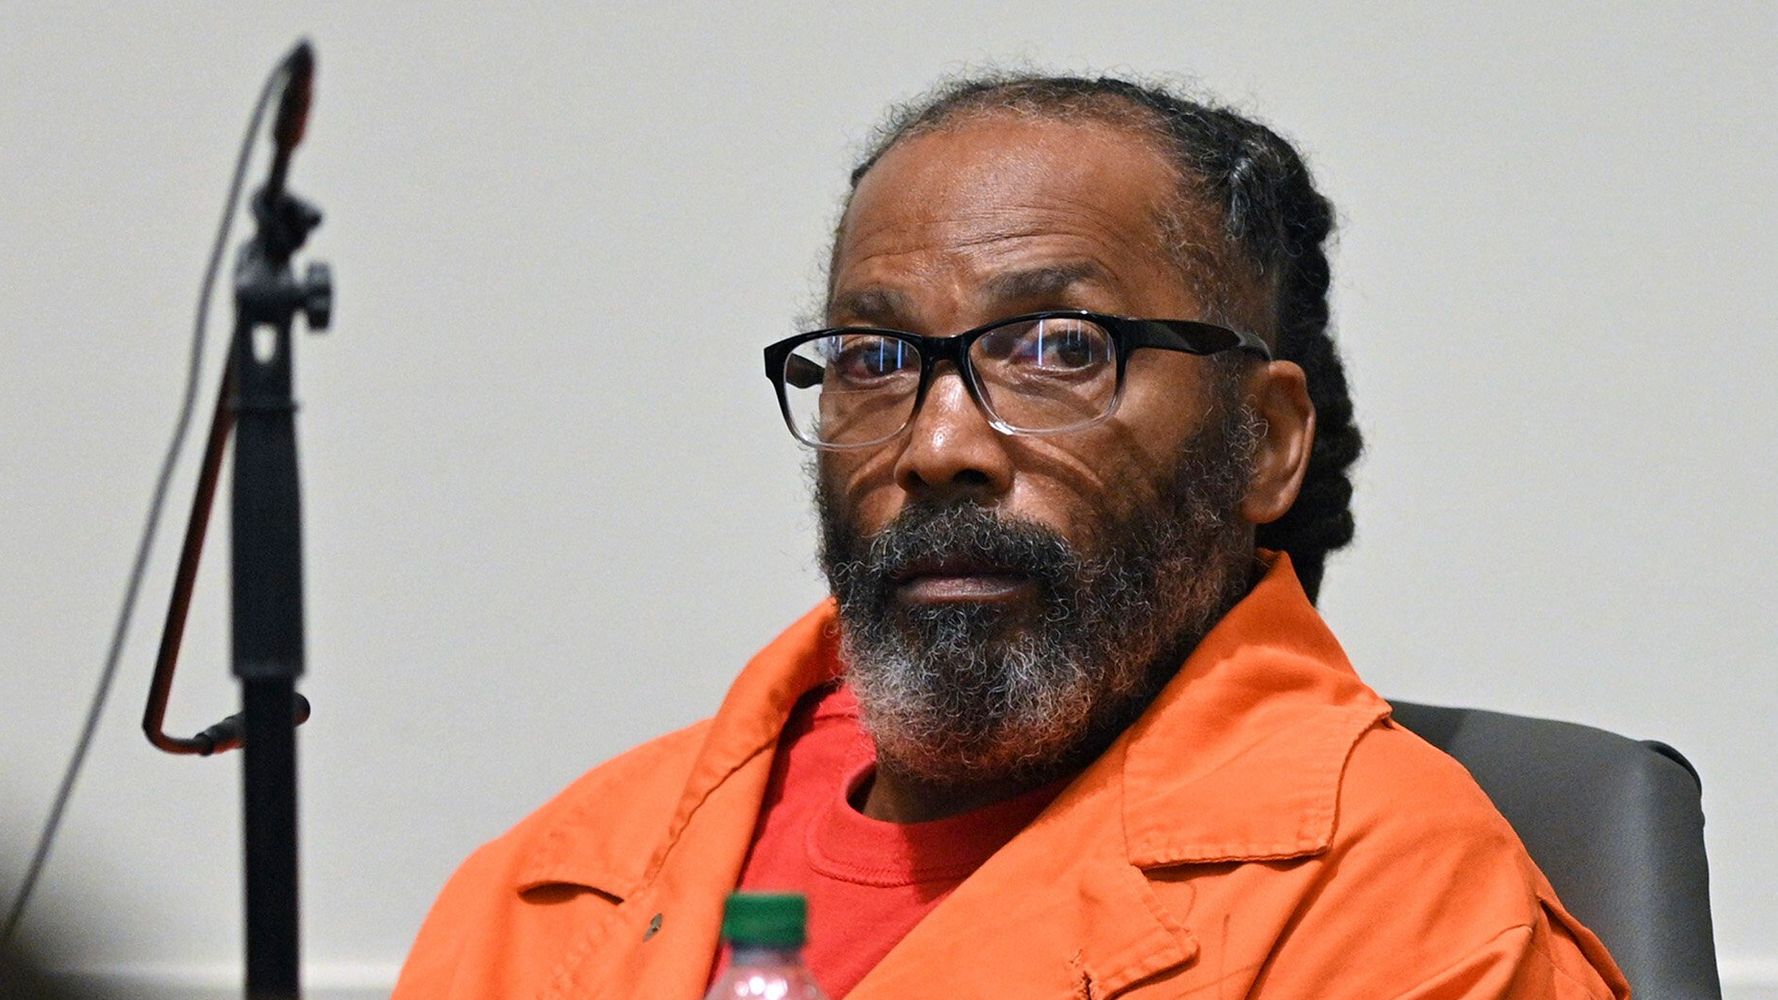 Judge Exonerates Man Jailed For Over 40 Years On Wrongful Triple Murder Conviction | HuffPost Latest News